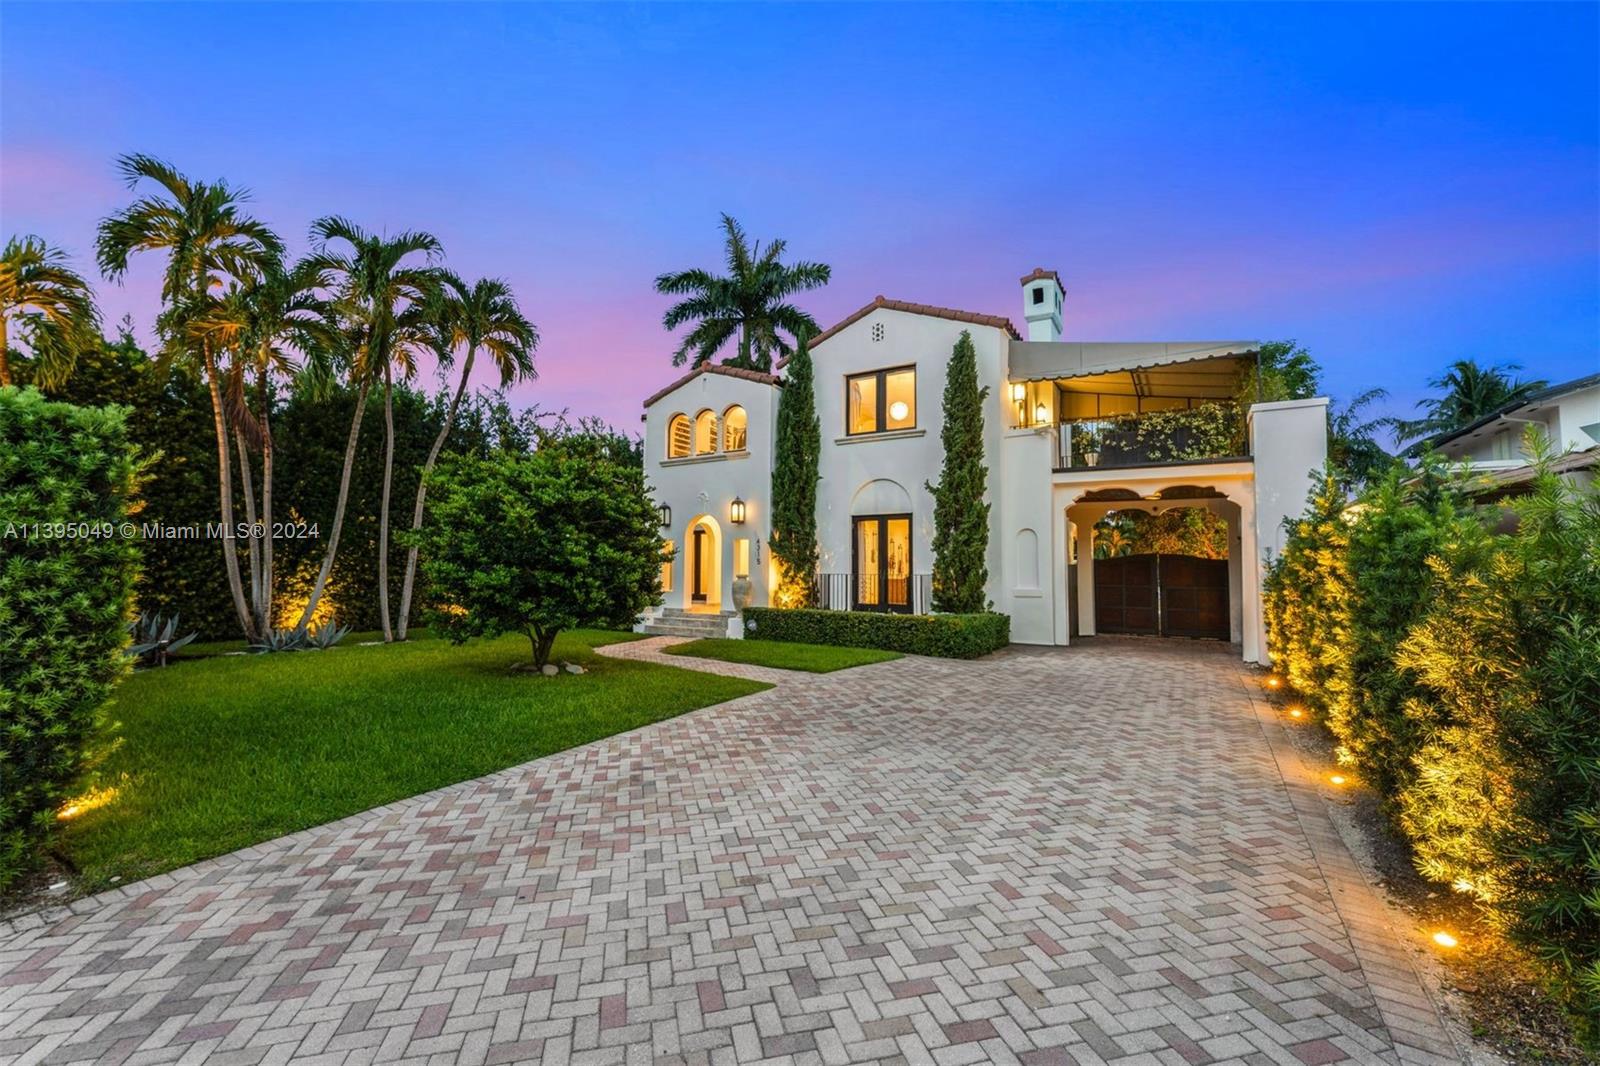 Property for Sale at 4315 N Meridian Ave, Miami Beach, Miami-Dade County, Florida - Bedrooms: 4 
Bathrooms: 5  - $6,850,000